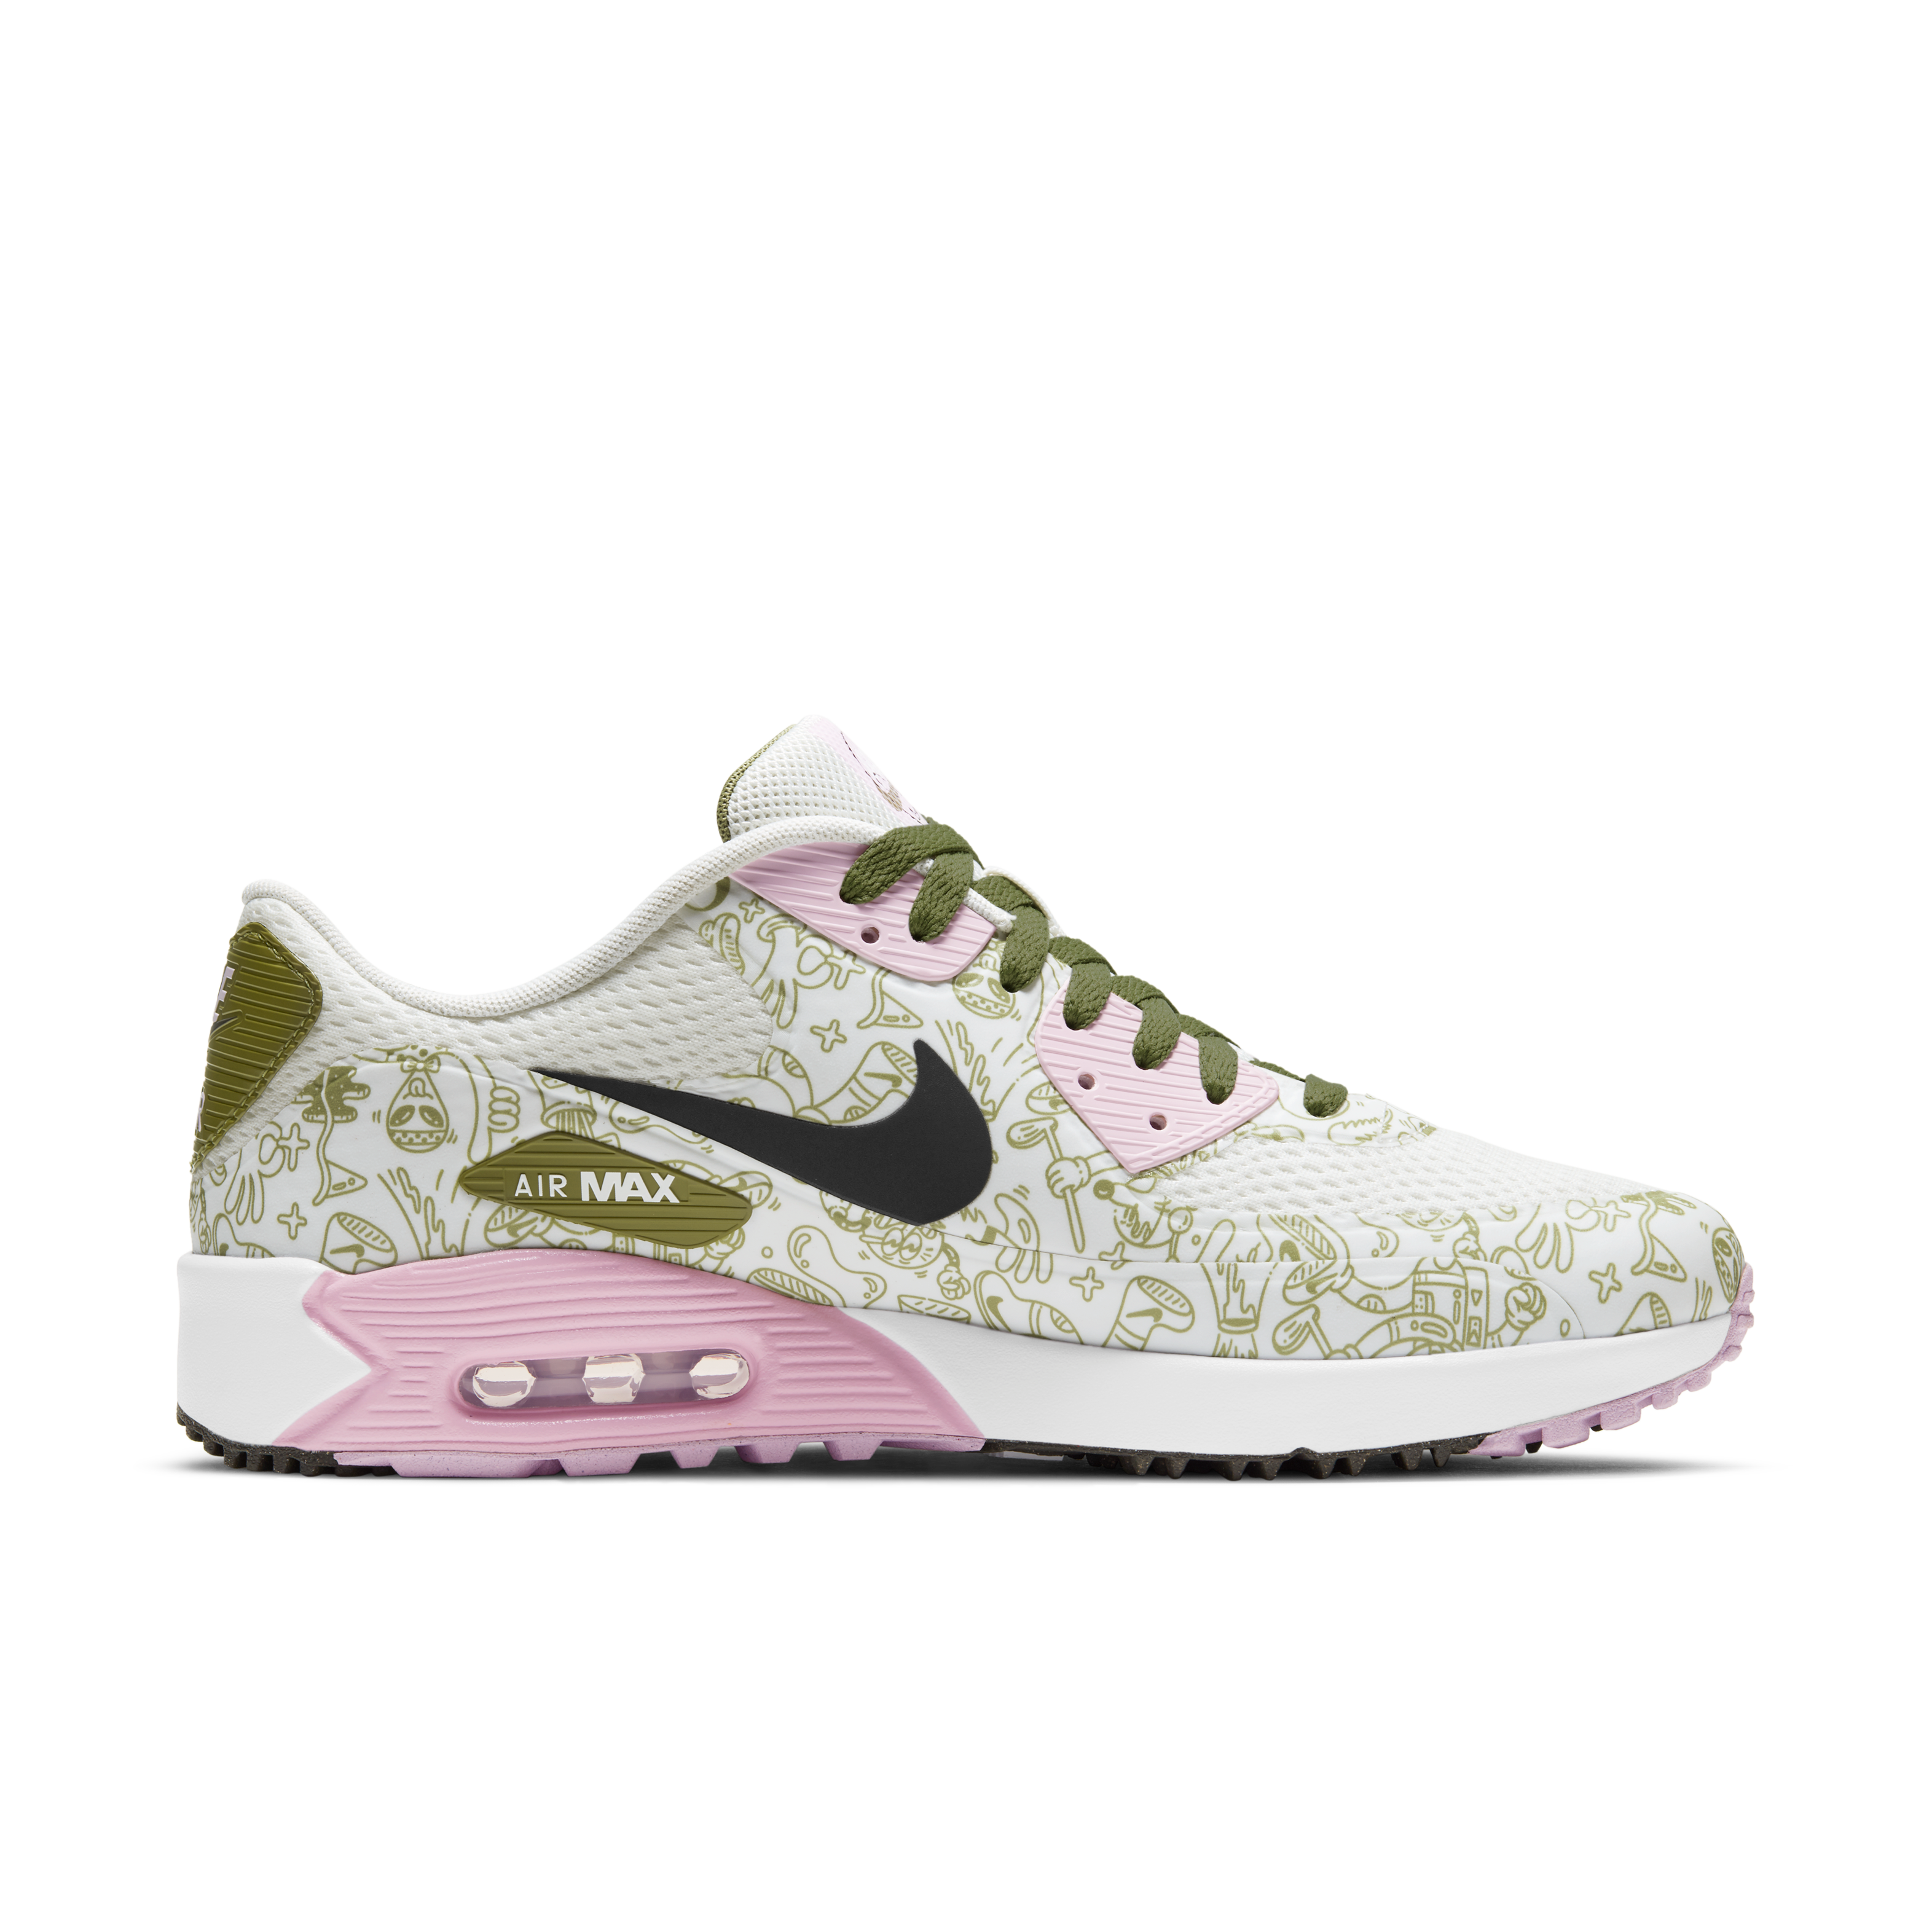 Nike Air Max 90 NRG Spikeless Shoe - Waste Management | NIKE